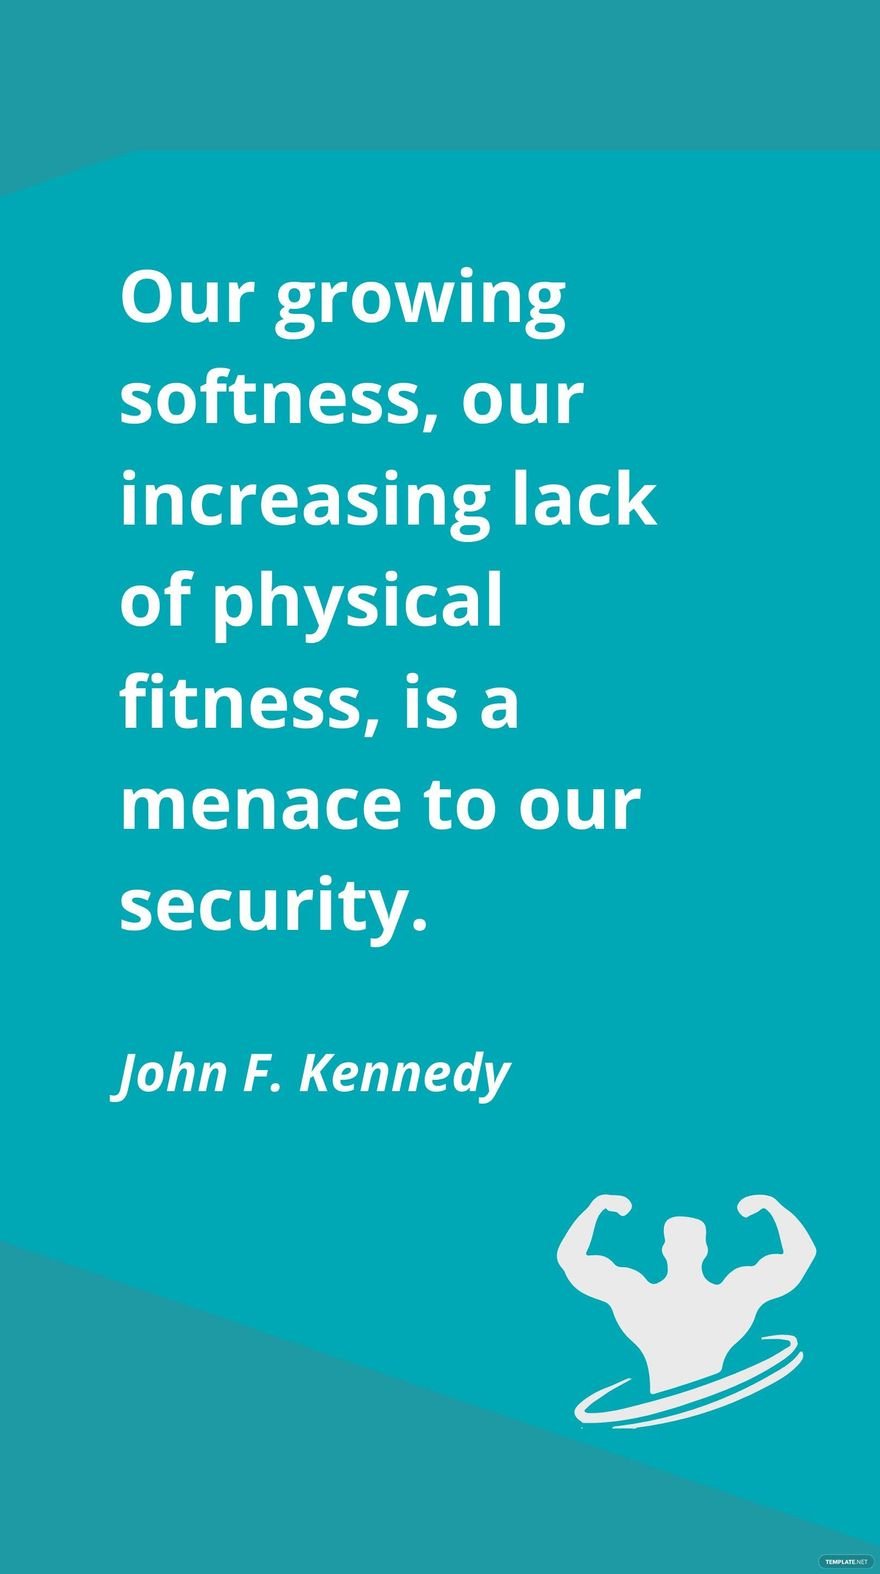 Free John F. Kennedy - Our growing softness, our increasing lack of physical fitness, is a menace to our security.